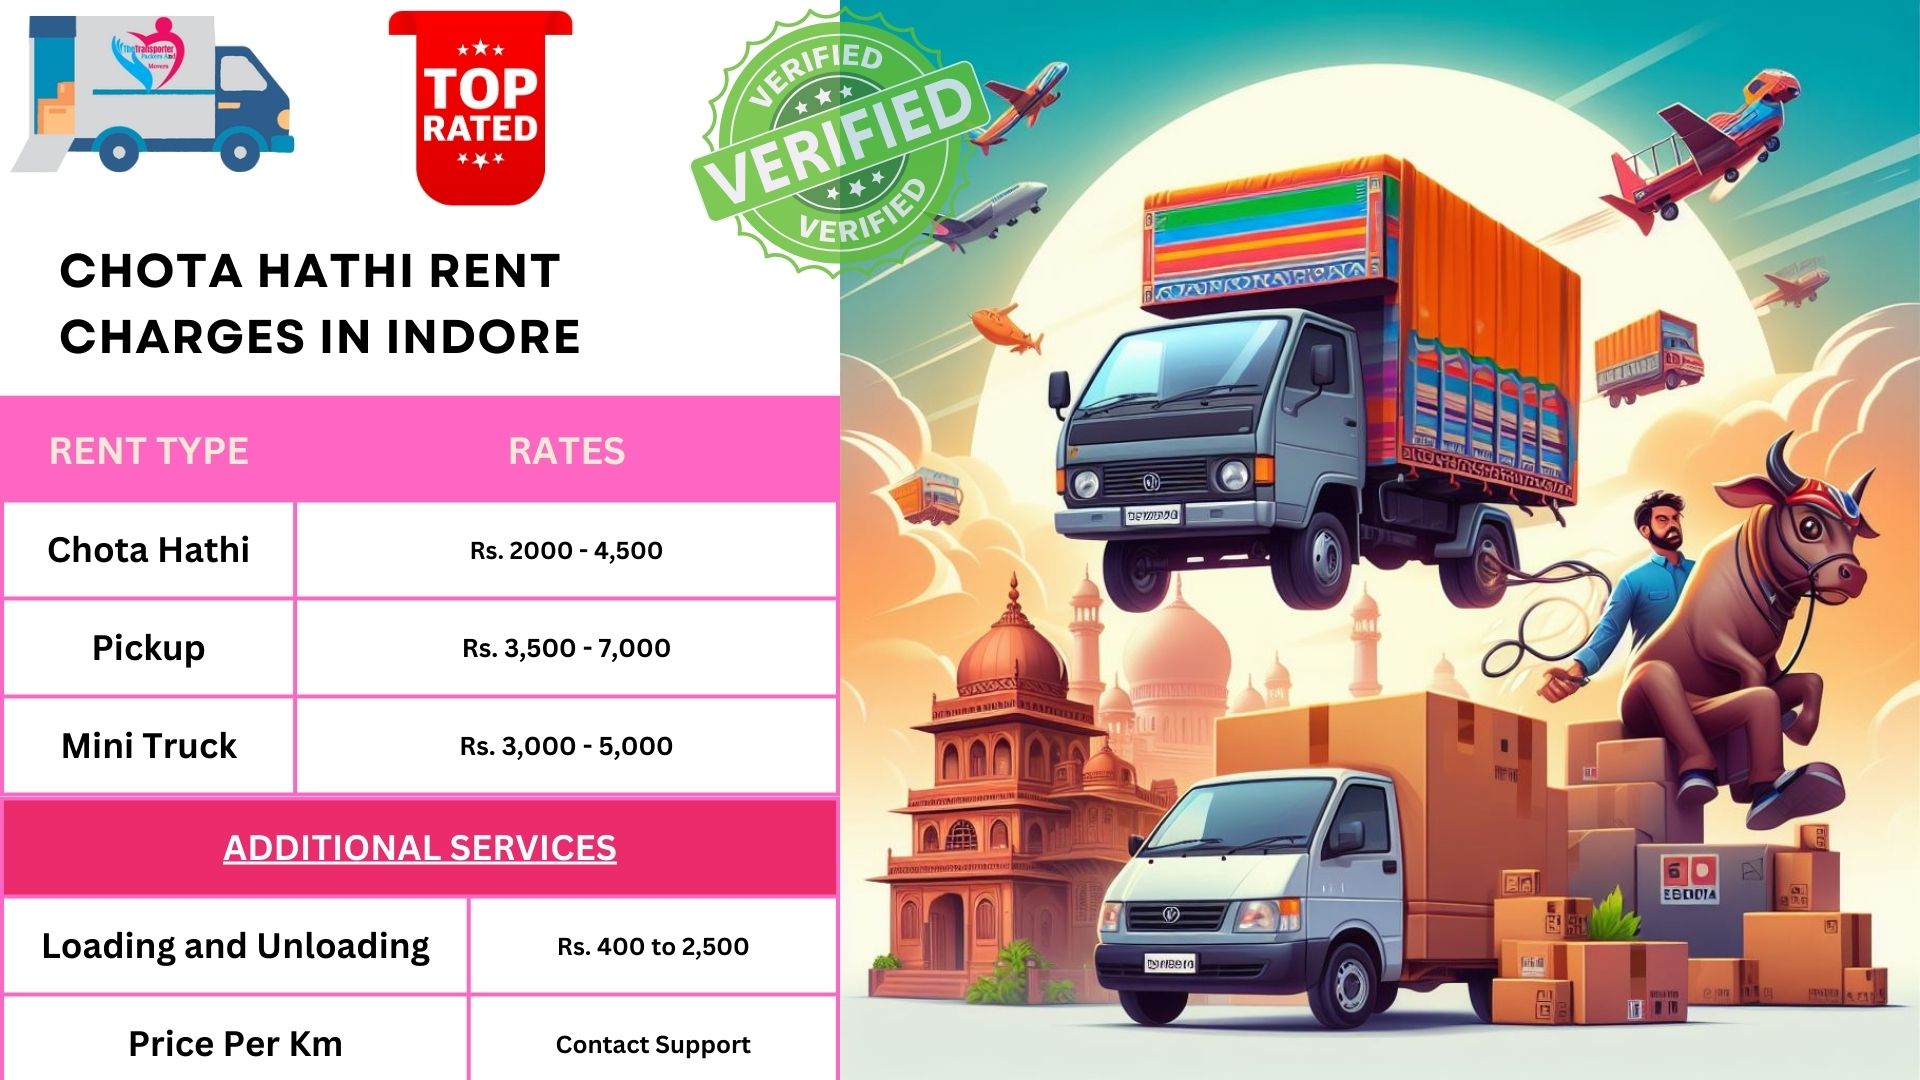 Getting the Best Chota Hathi on Rent in Indore